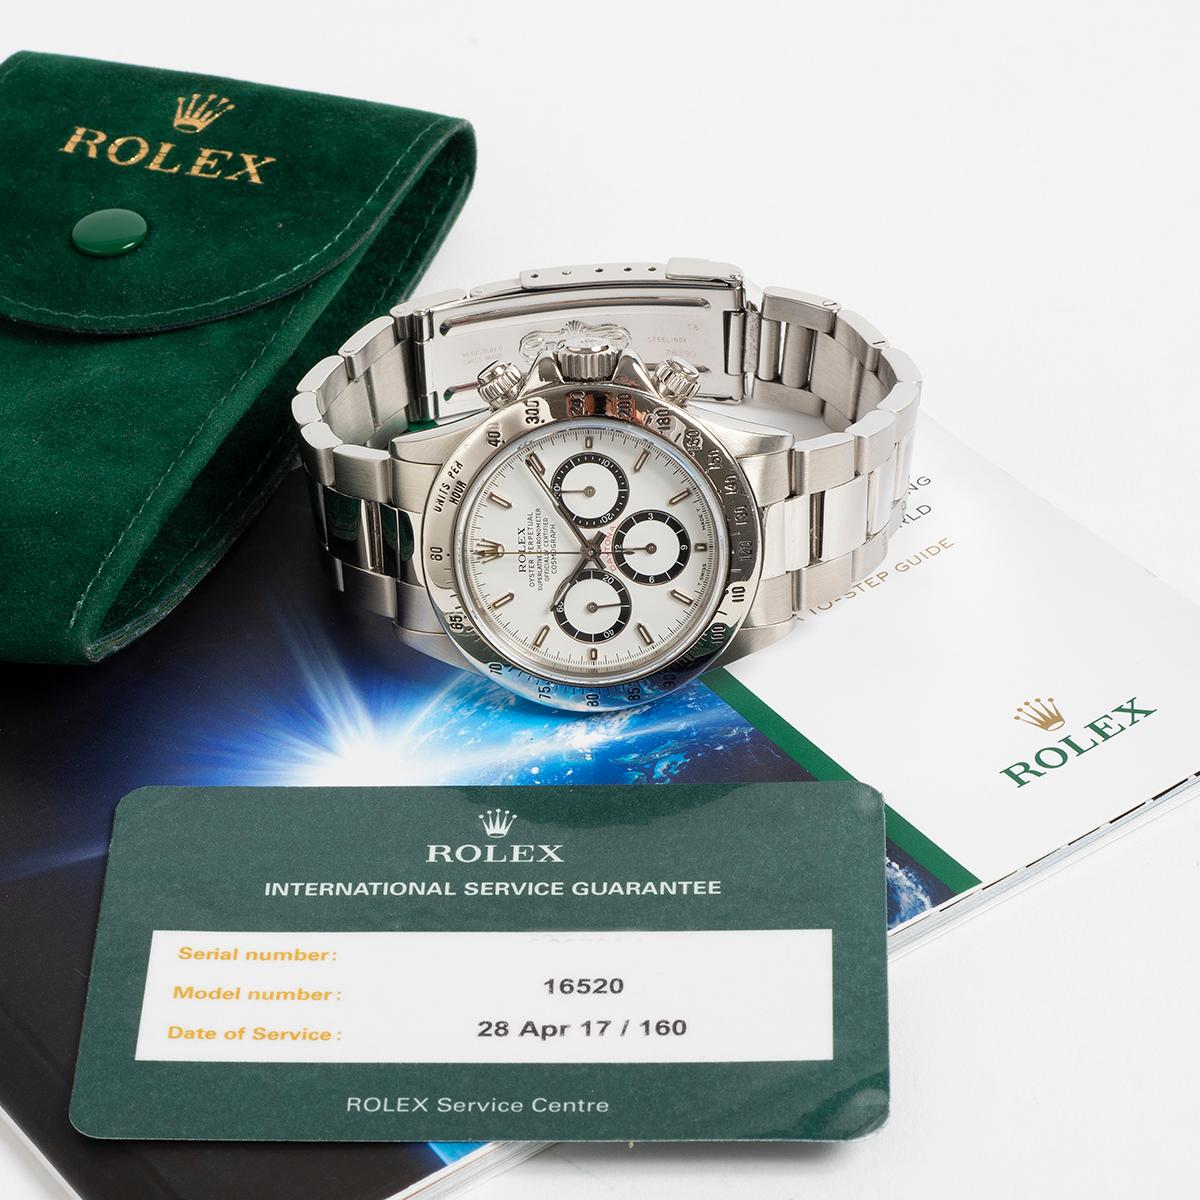 Our Rolex Daytona with stainless steel case and bracelet , reference 16520 ,with zenith movement features the rarer inverted six white dial and is presented in excellent and original condition. Serviced at Rolex UK in 2017, this Daytona has been